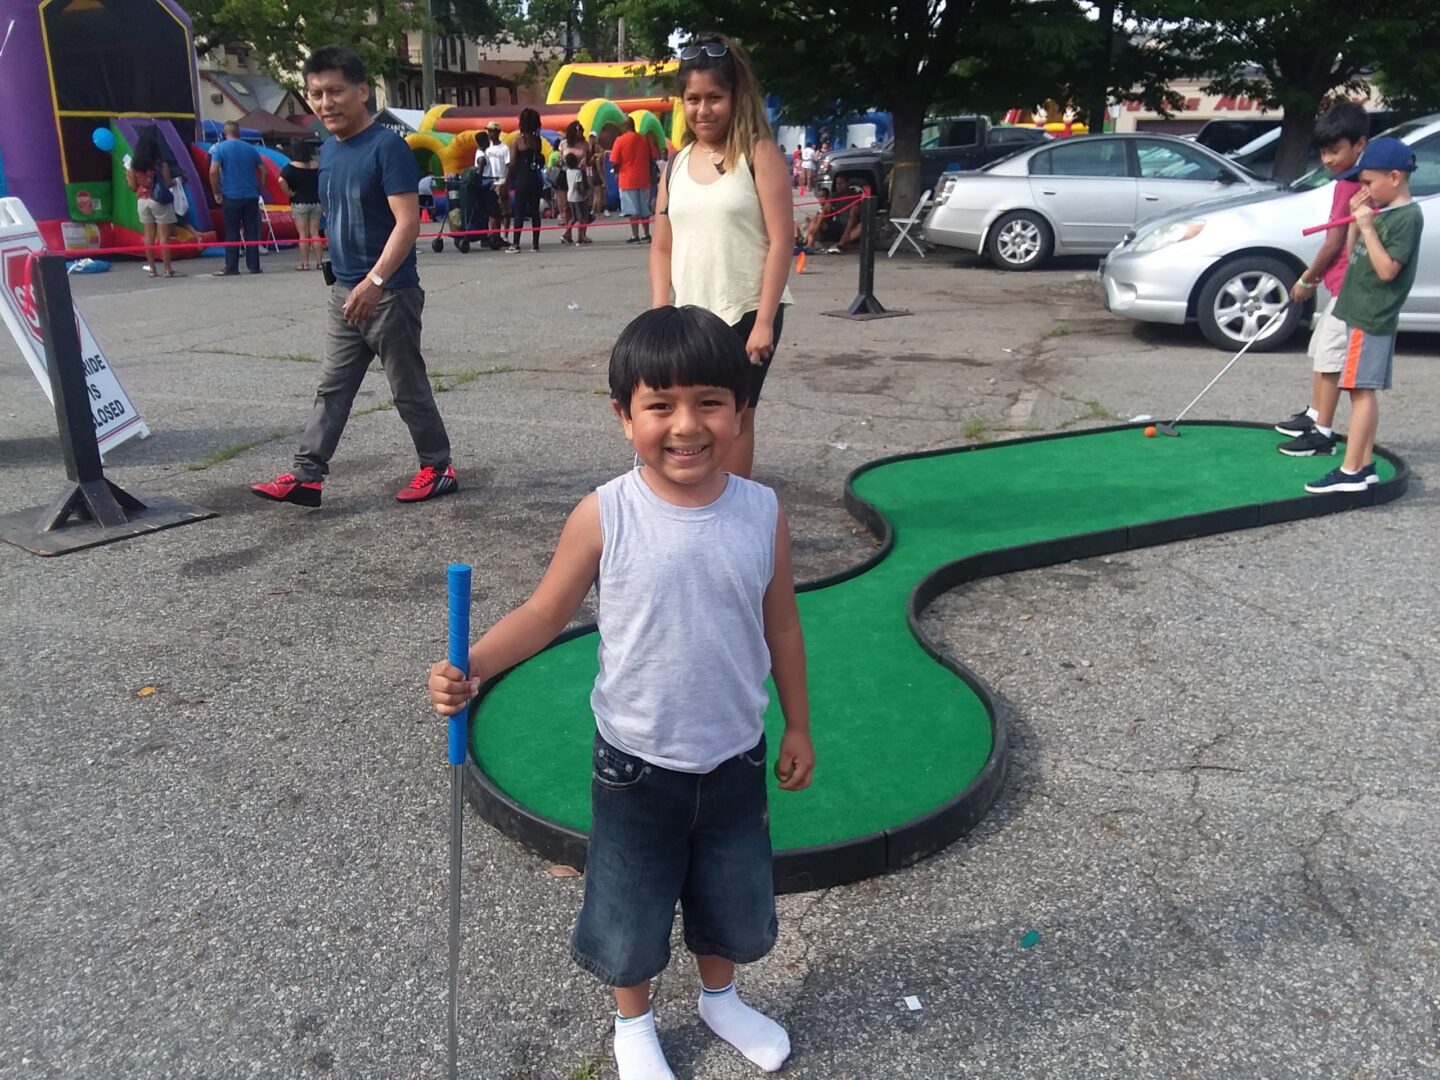 A young boy standing in front of a mini golf course.